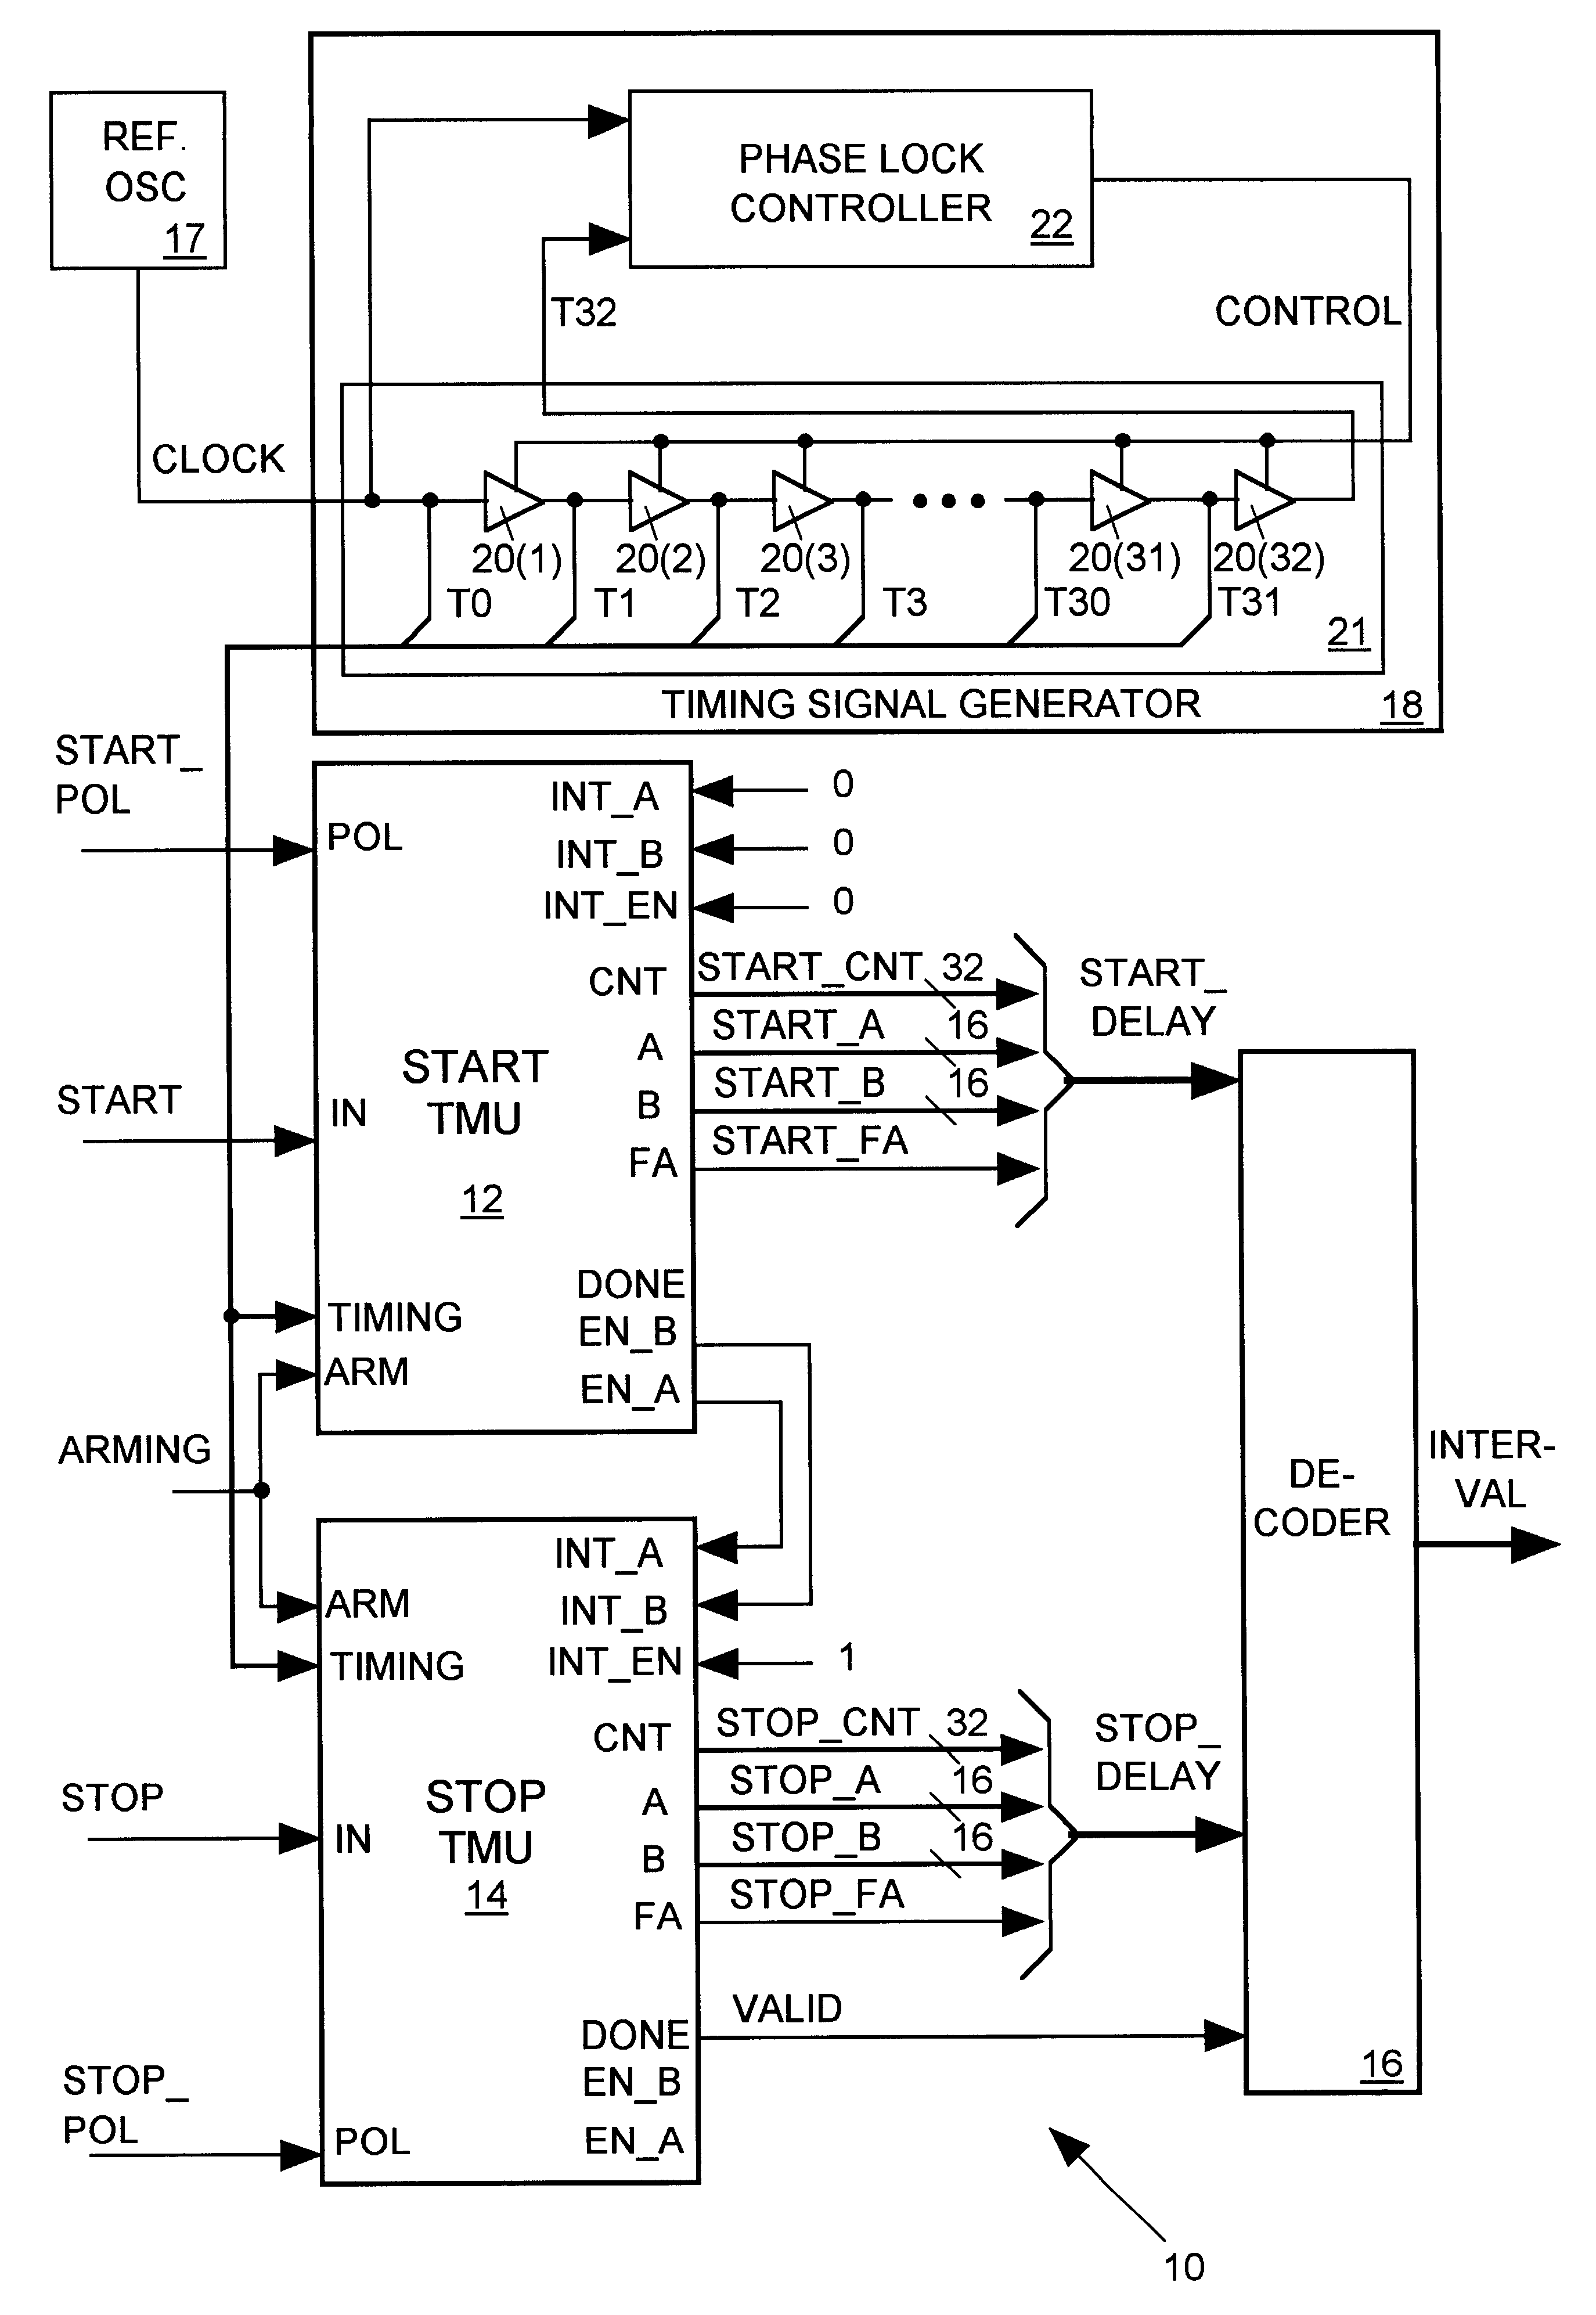 Apparatus for measuring intervals between signal edges